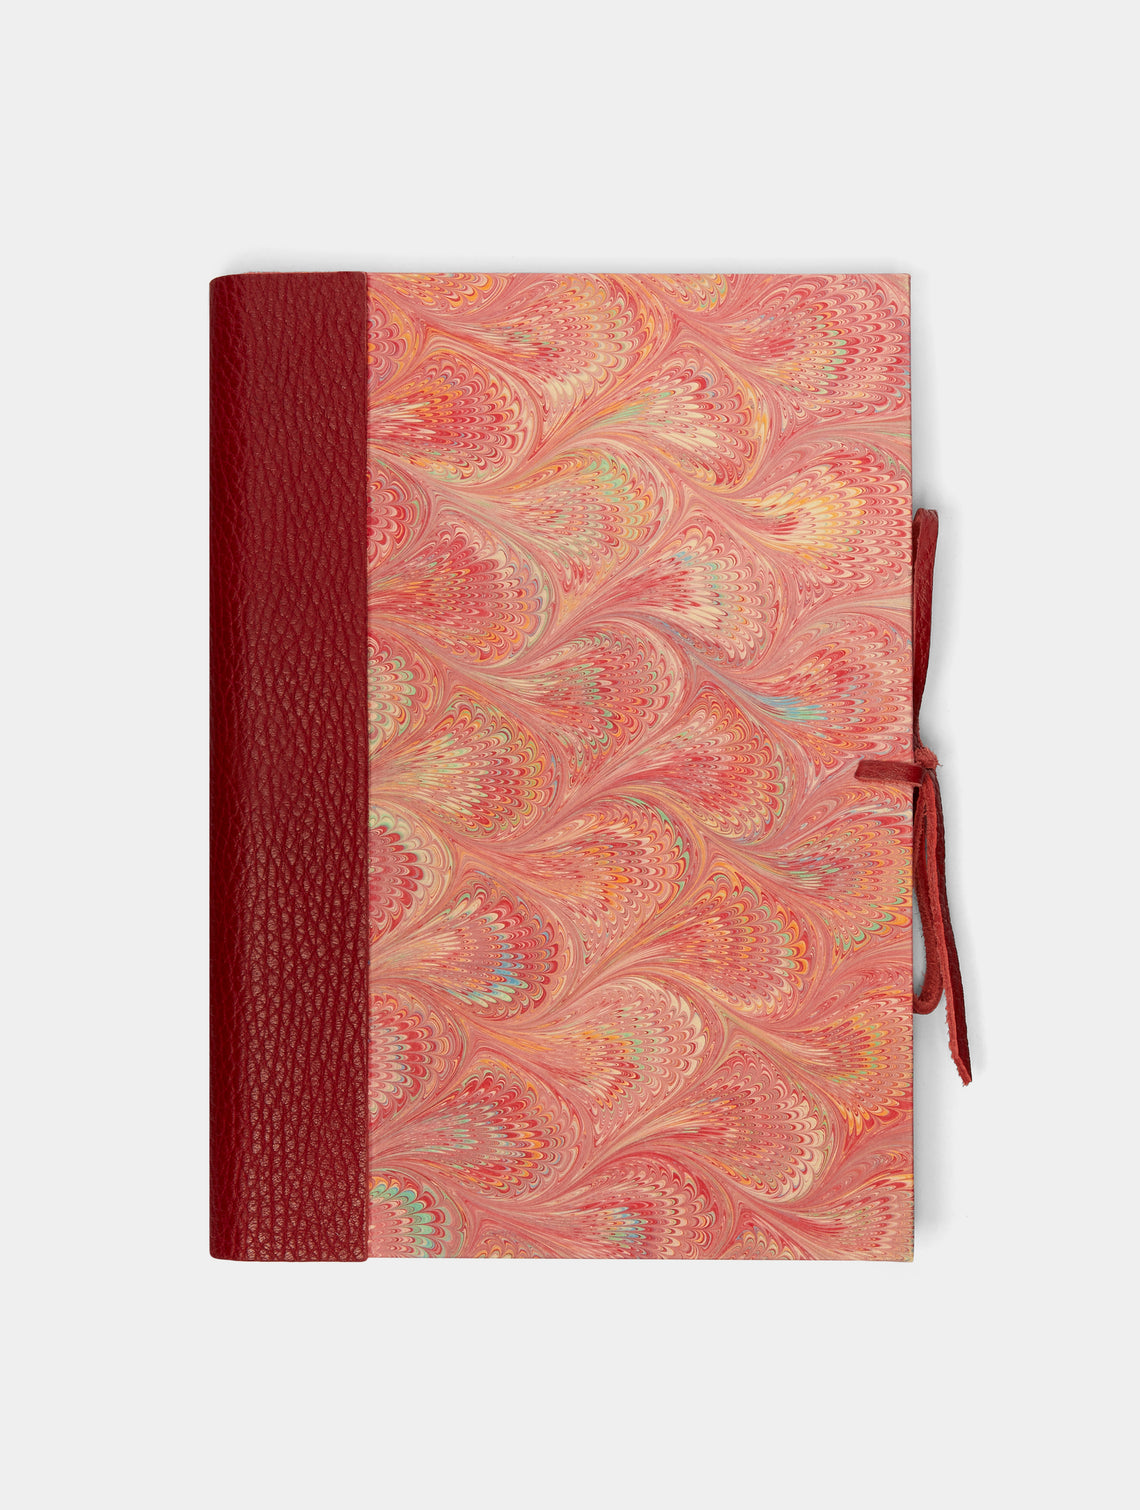 Giannini Firenze - Hand-Marbled Leather Bound Notebook - Red - ABASK - 